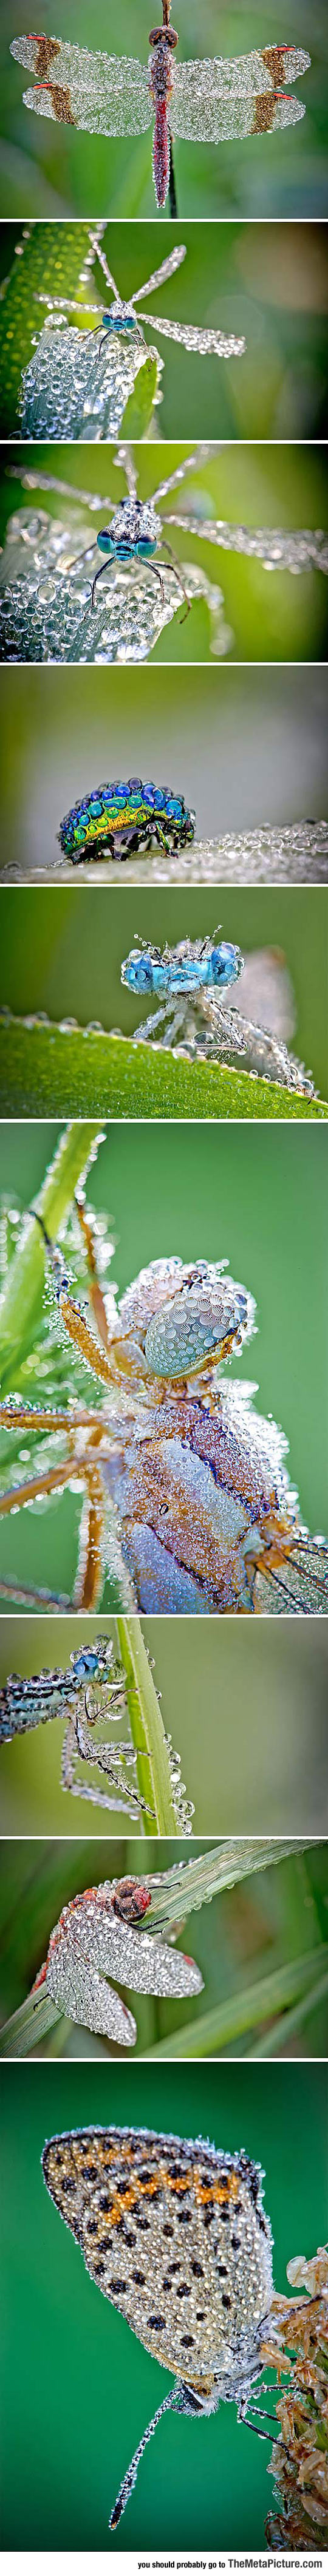 cool-insects-rain-drops-water-nature